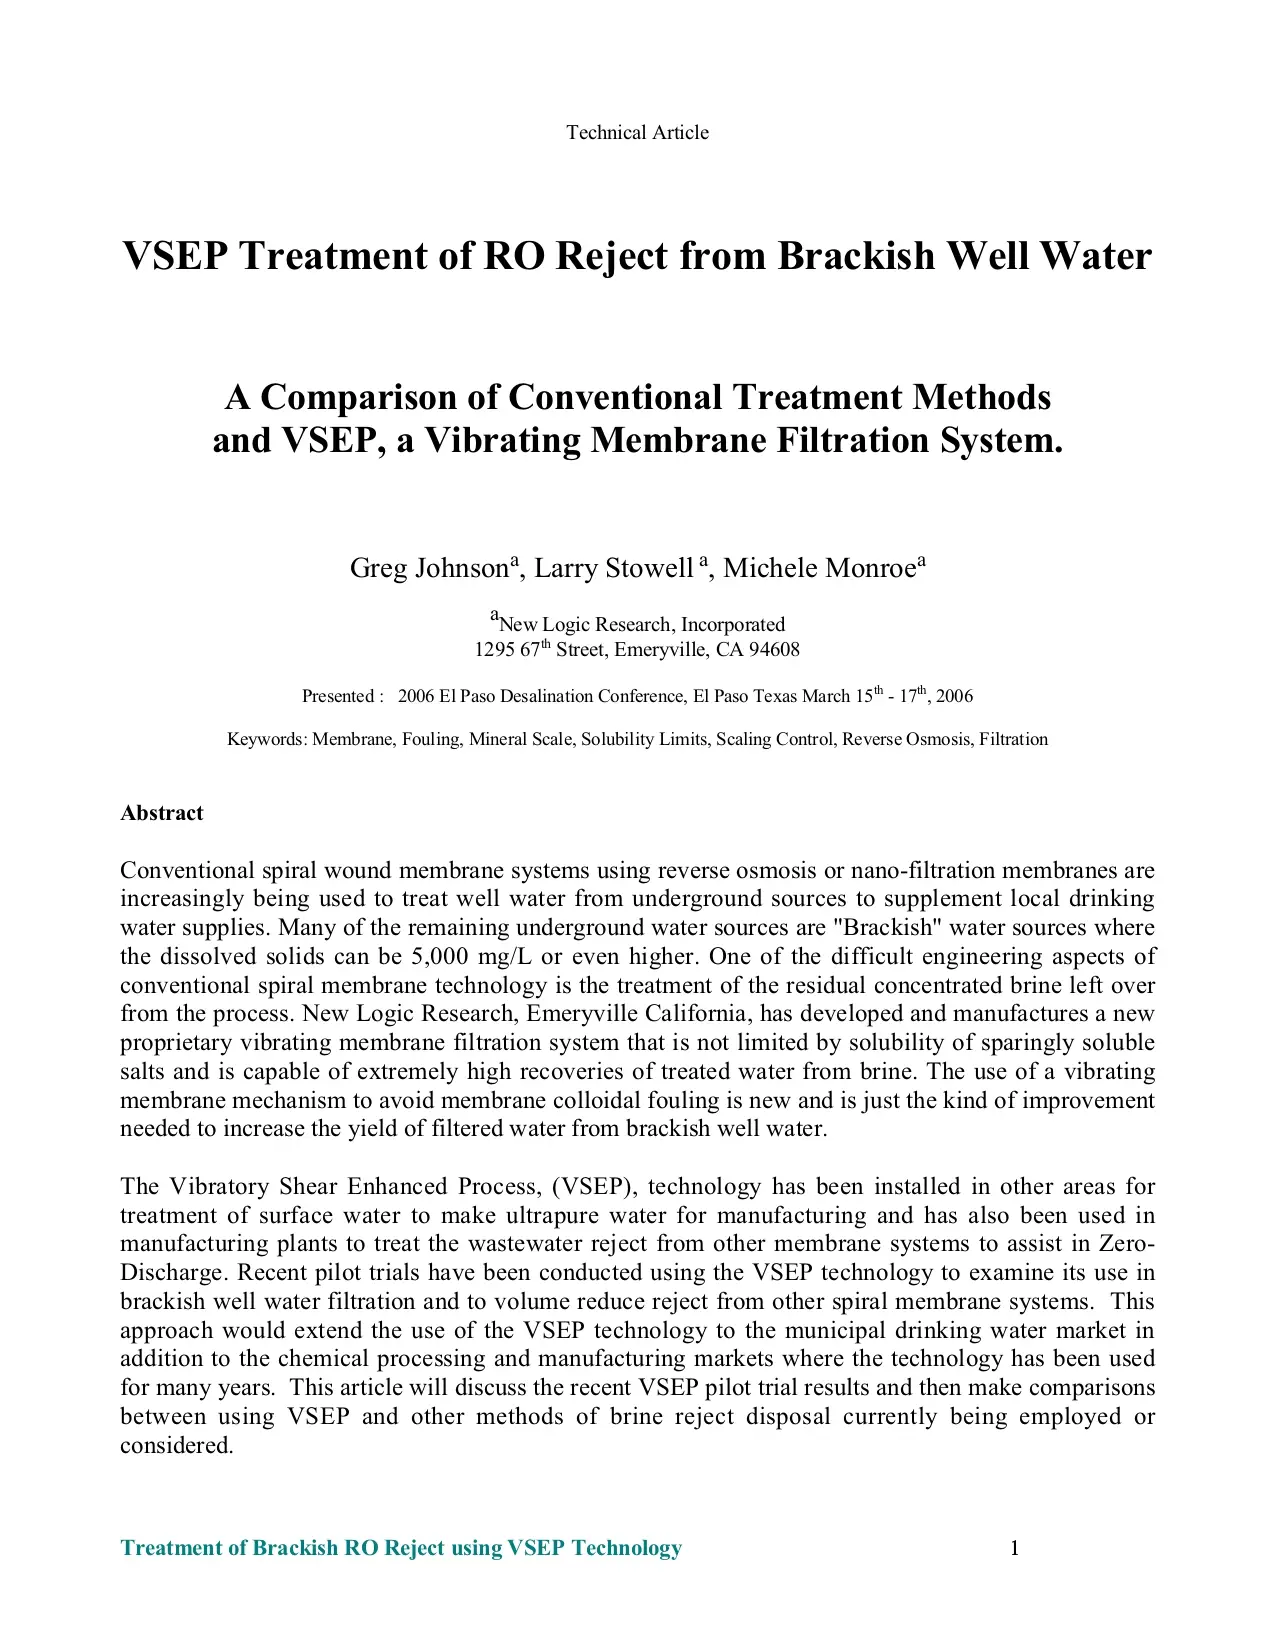 VSEP Treatment of RO Reject from Brackish Well Water